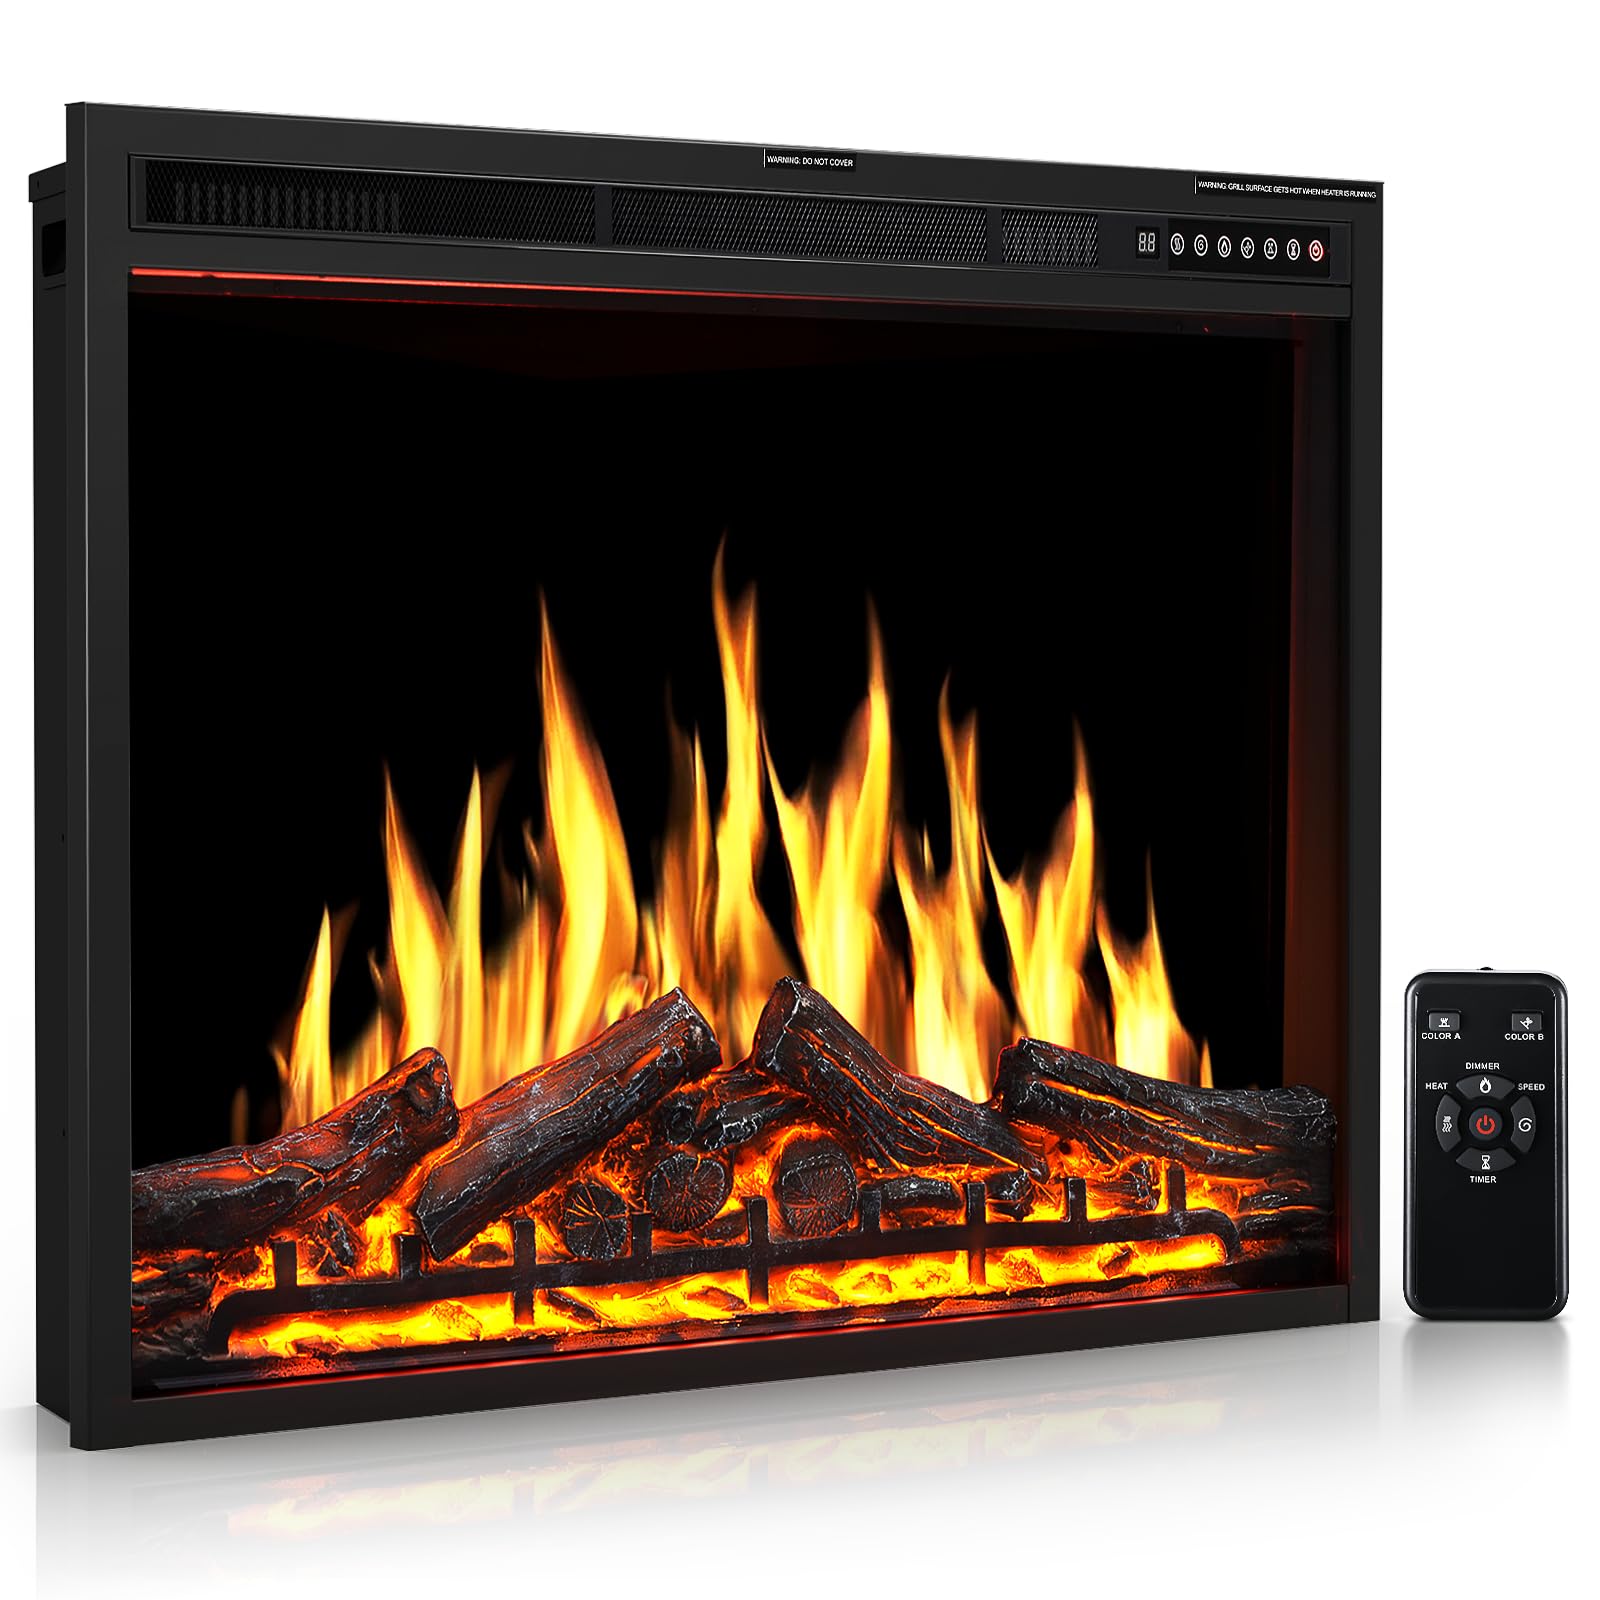 Do Electric Fireplaces Get Hot To The Touch